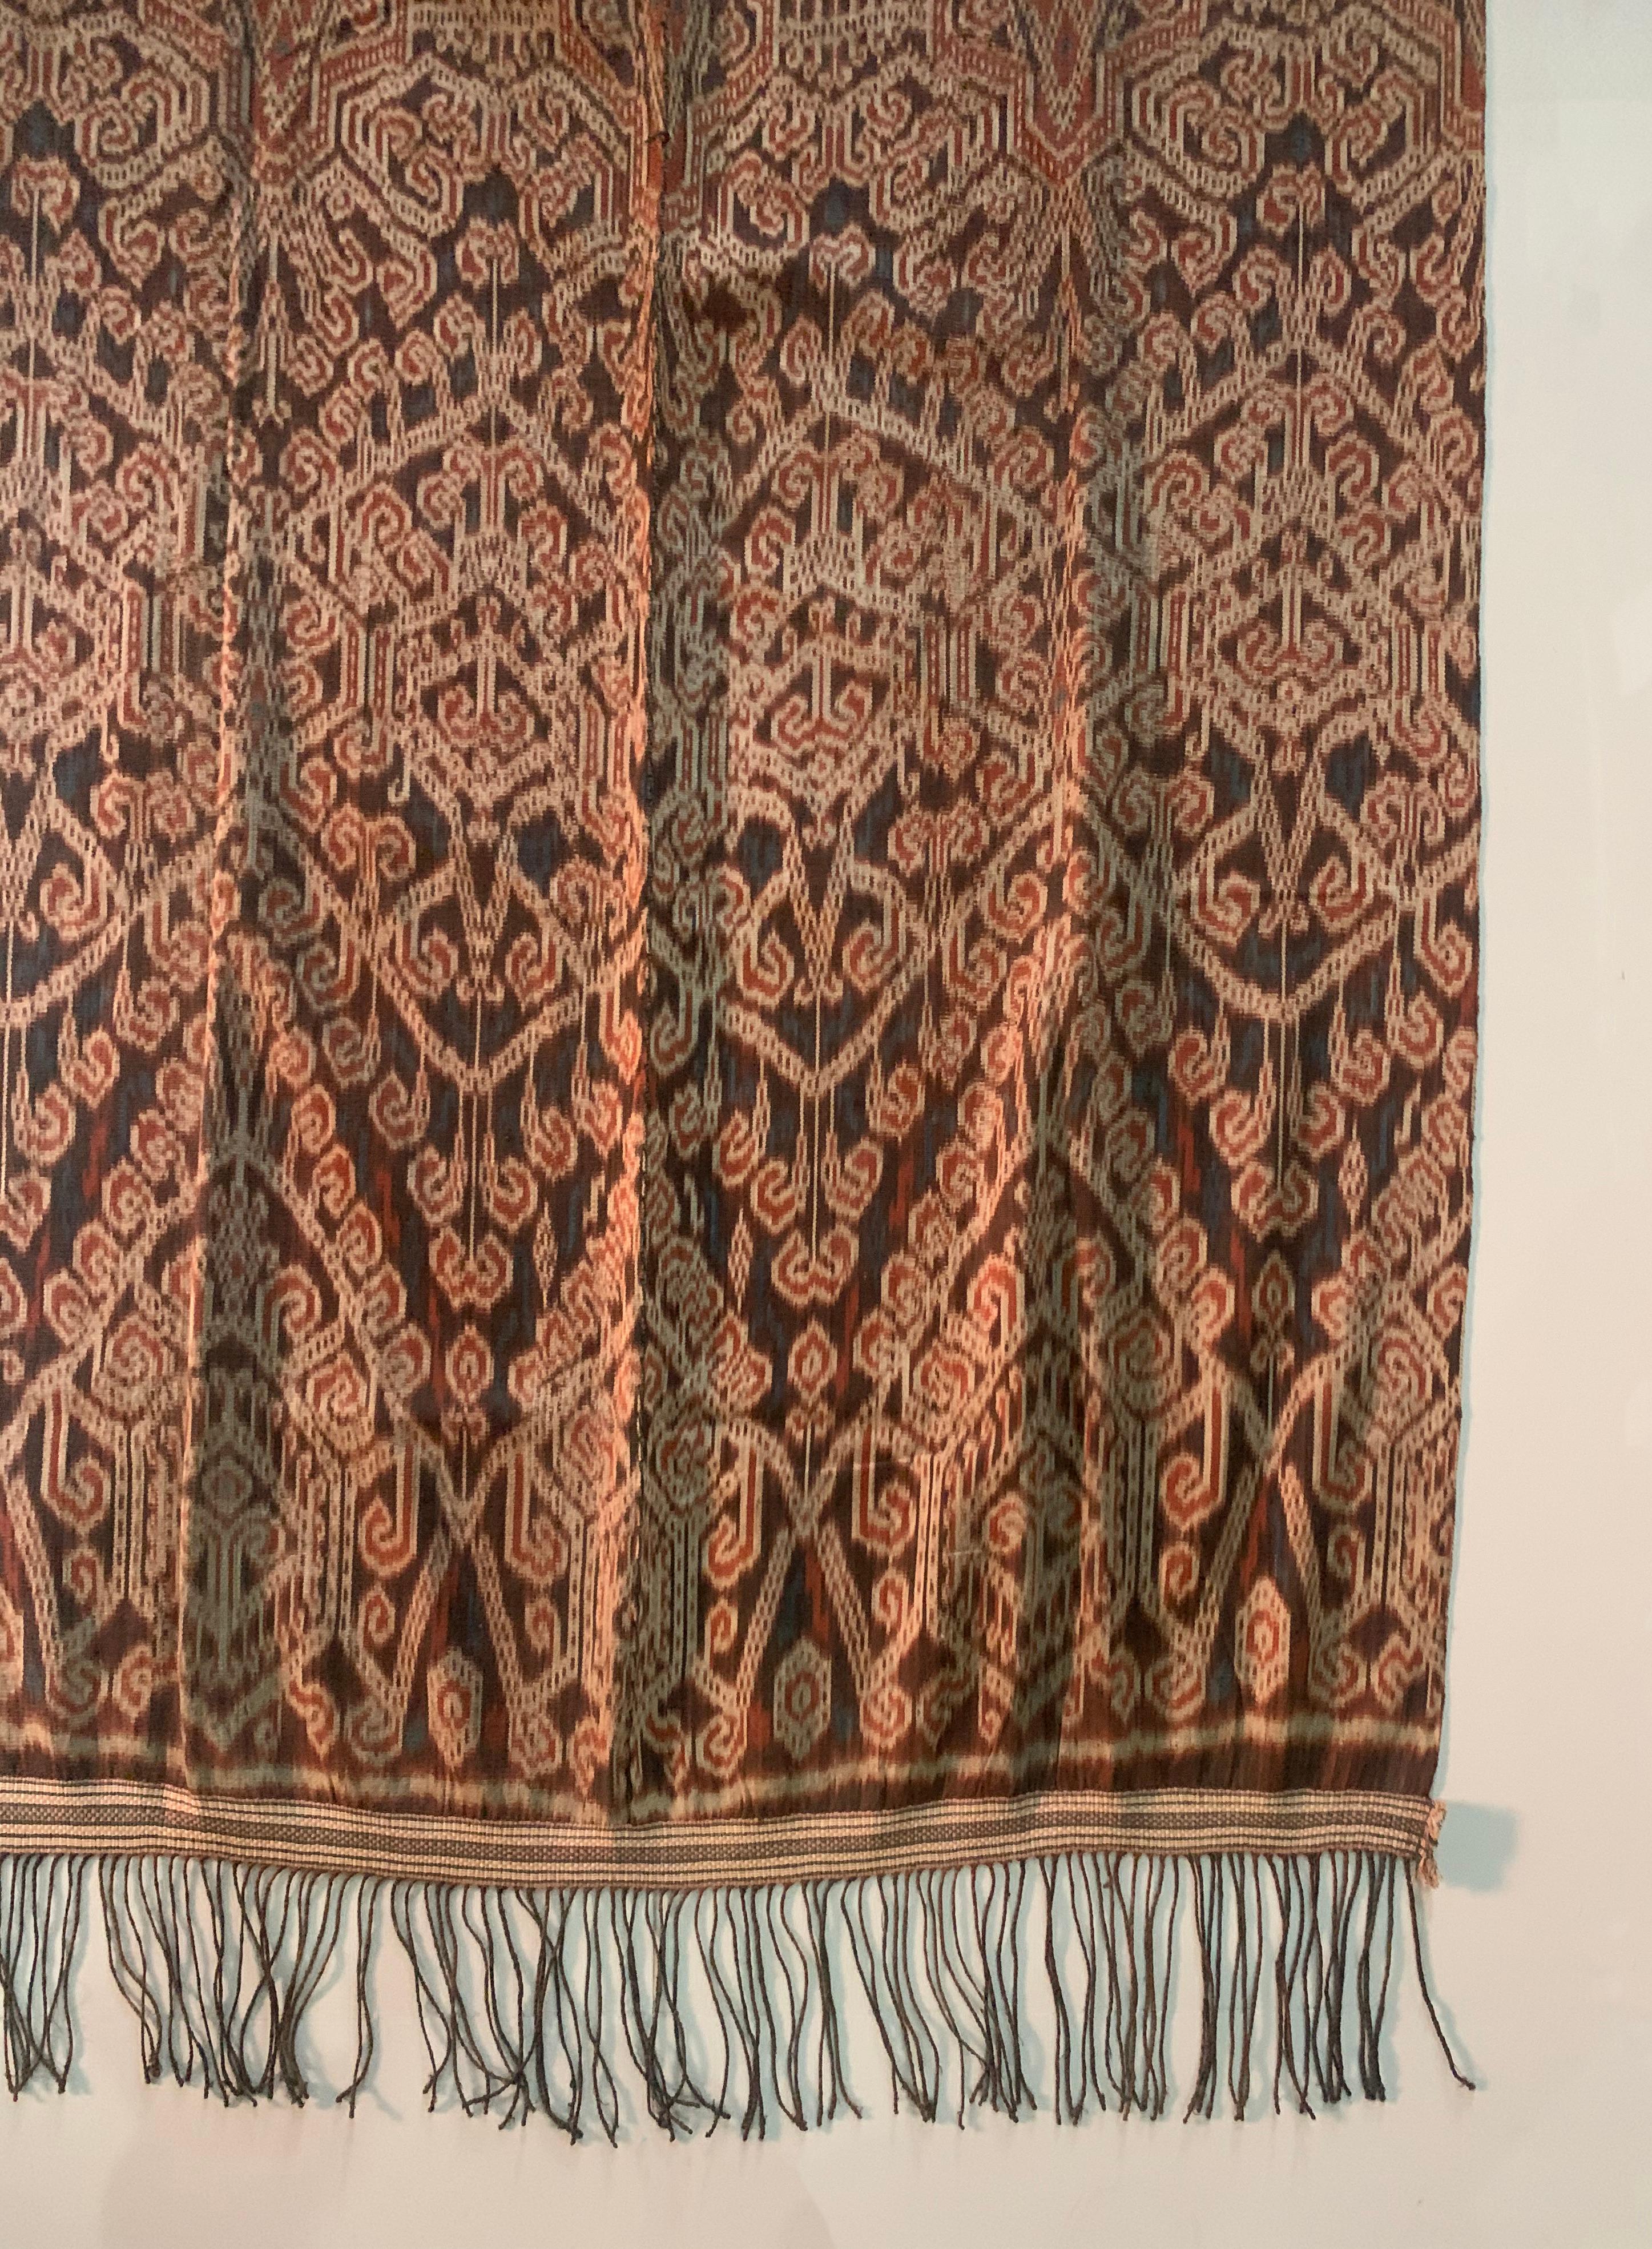 Other Ikat Textile from Sumba Island with Stunning Tribal Motifs, Indonesia